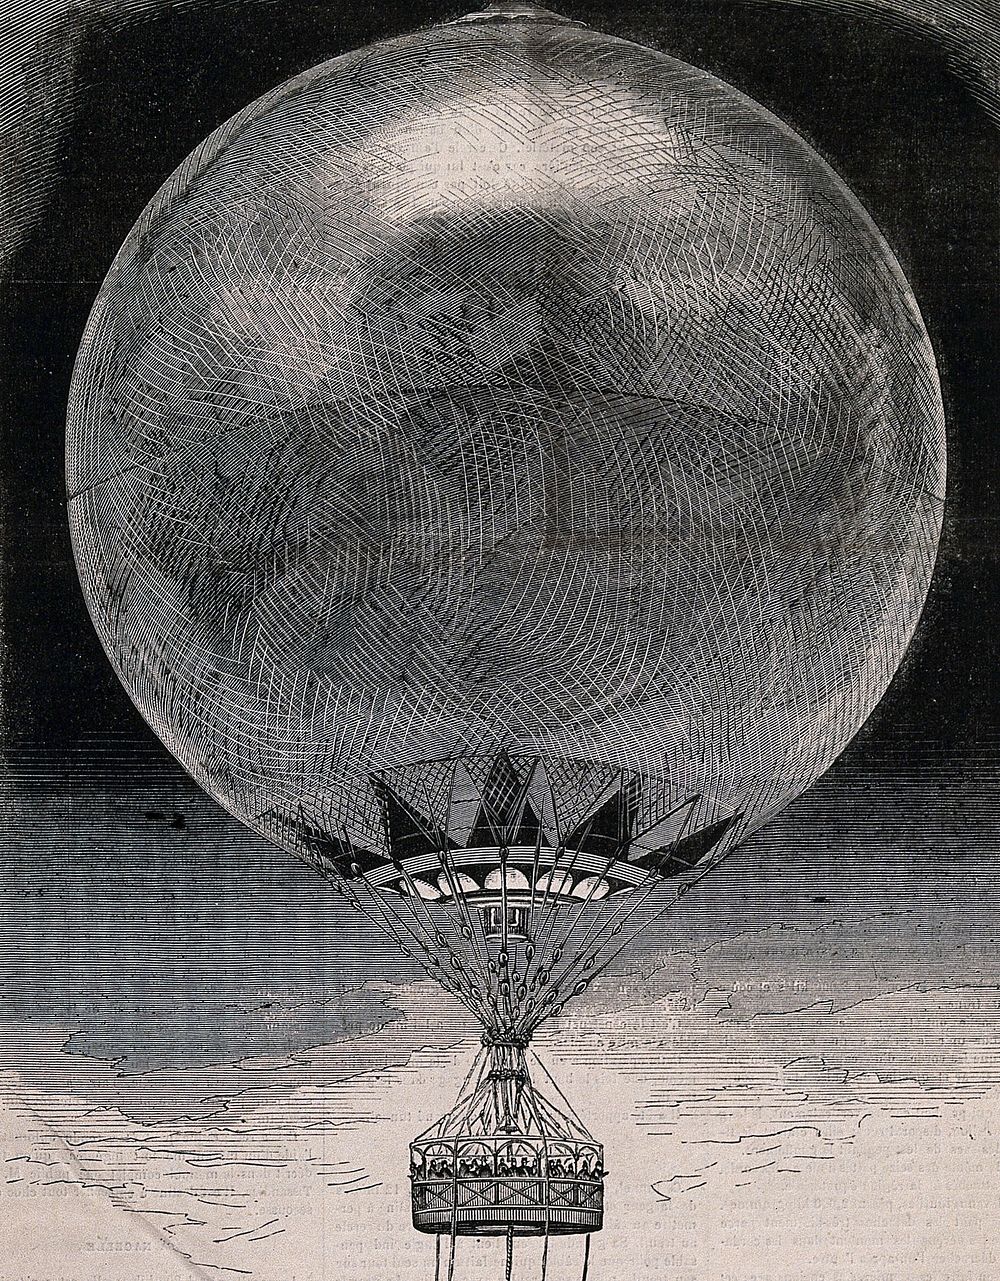 A large hot-air balloon with a basket carrying many people. Wood engraving.